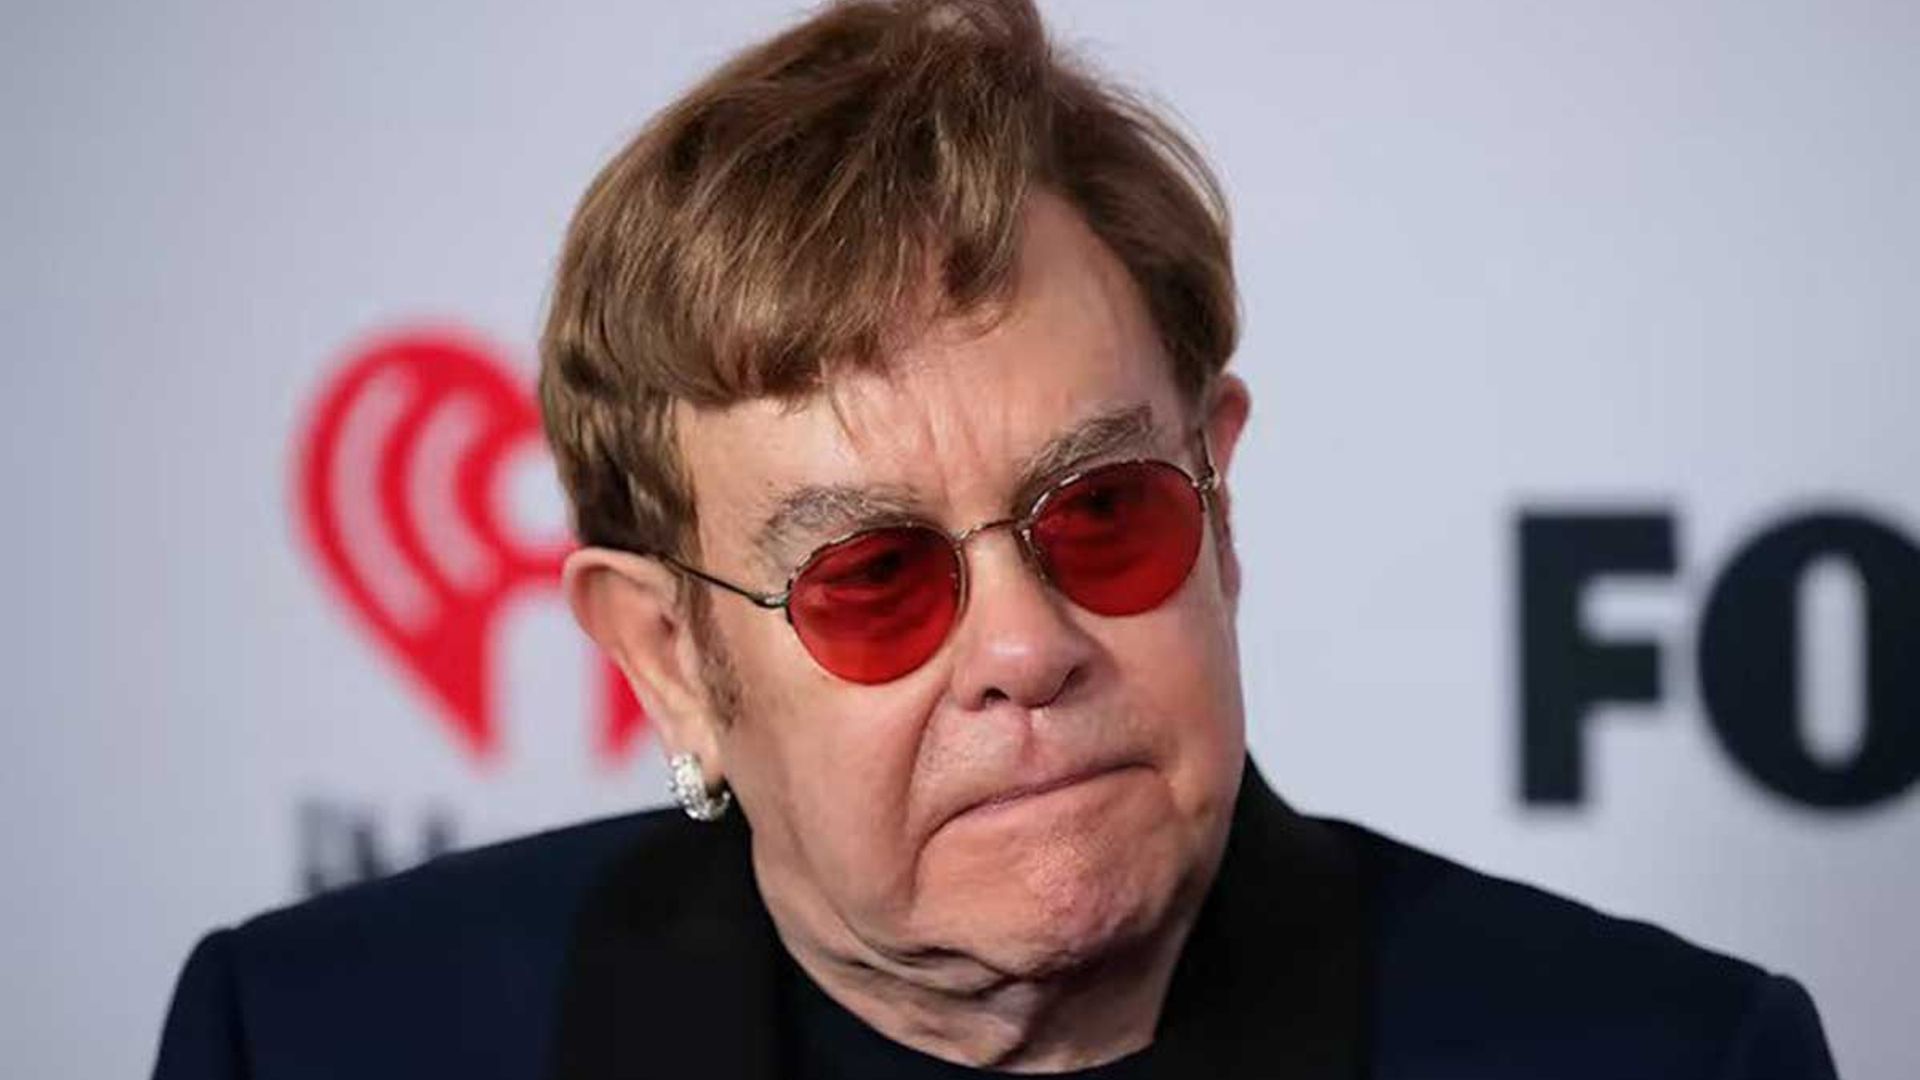 Elton John shares heartbreak with emotional message as he mourns sad death  - fans send support | HELLO!